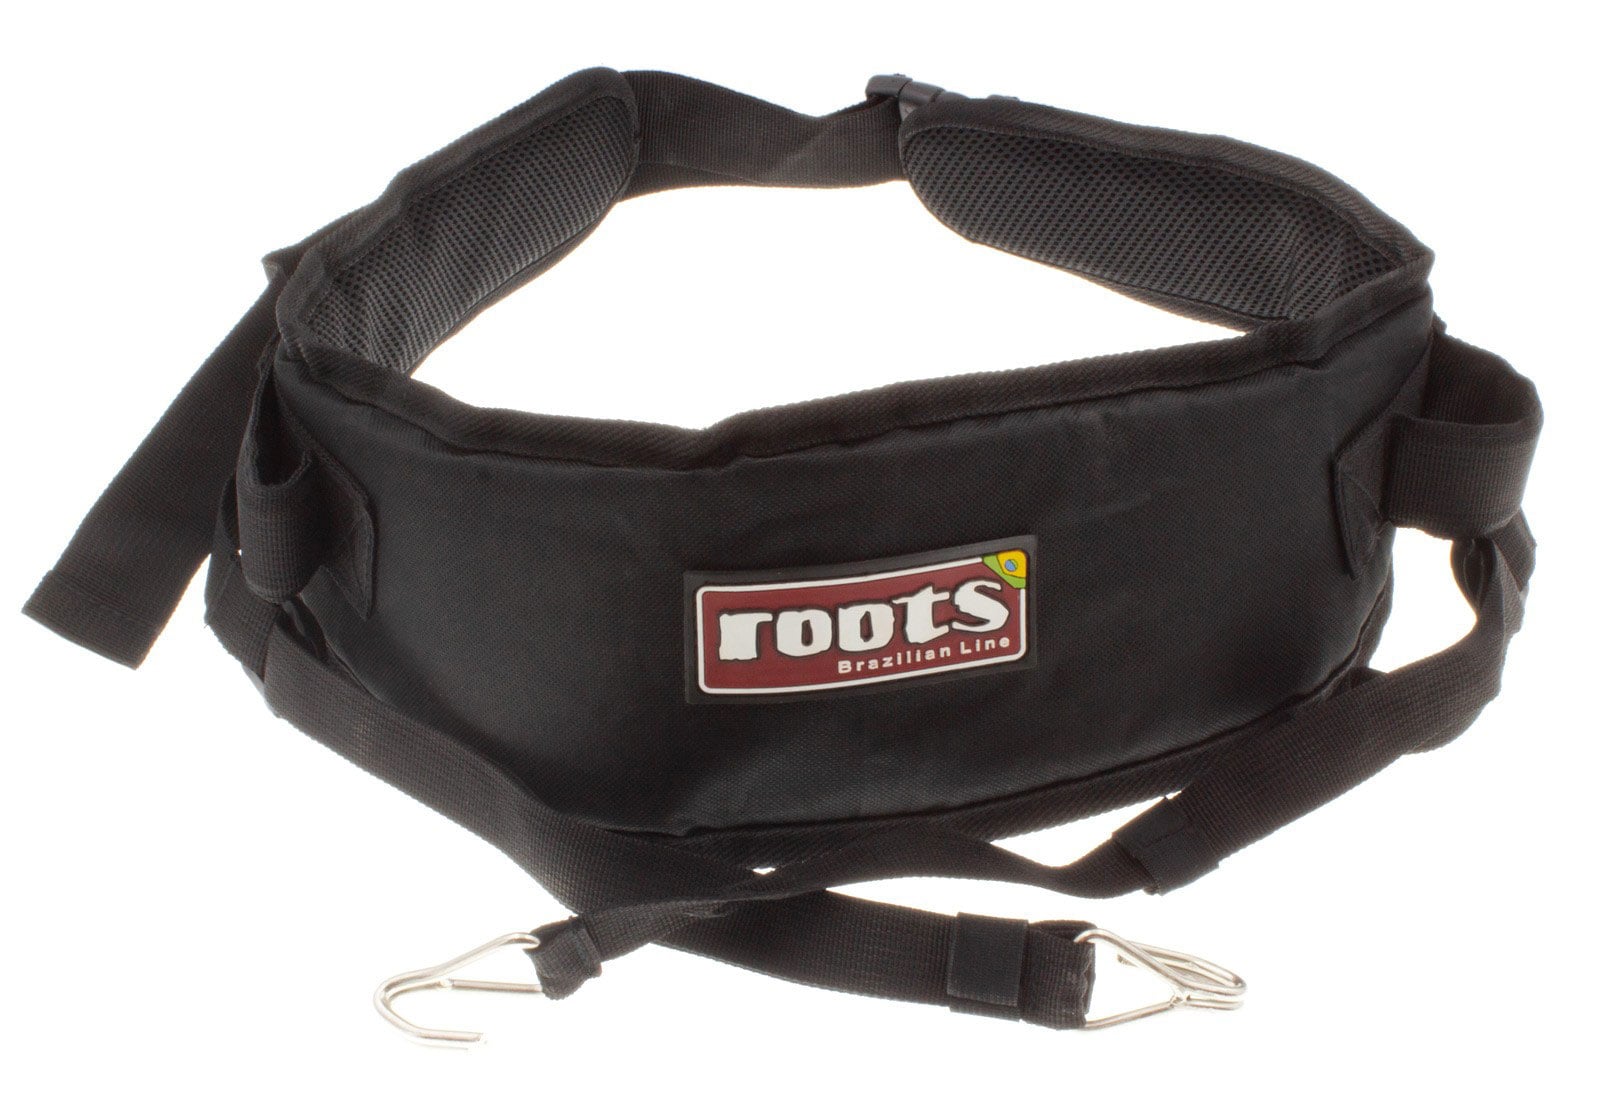 ROOTS PERCUSSION DELUXE HARNESS STRAP DJEMBE SURDO 2 REINFORCED HOOKS MULTI PERCUSSION SIZE M